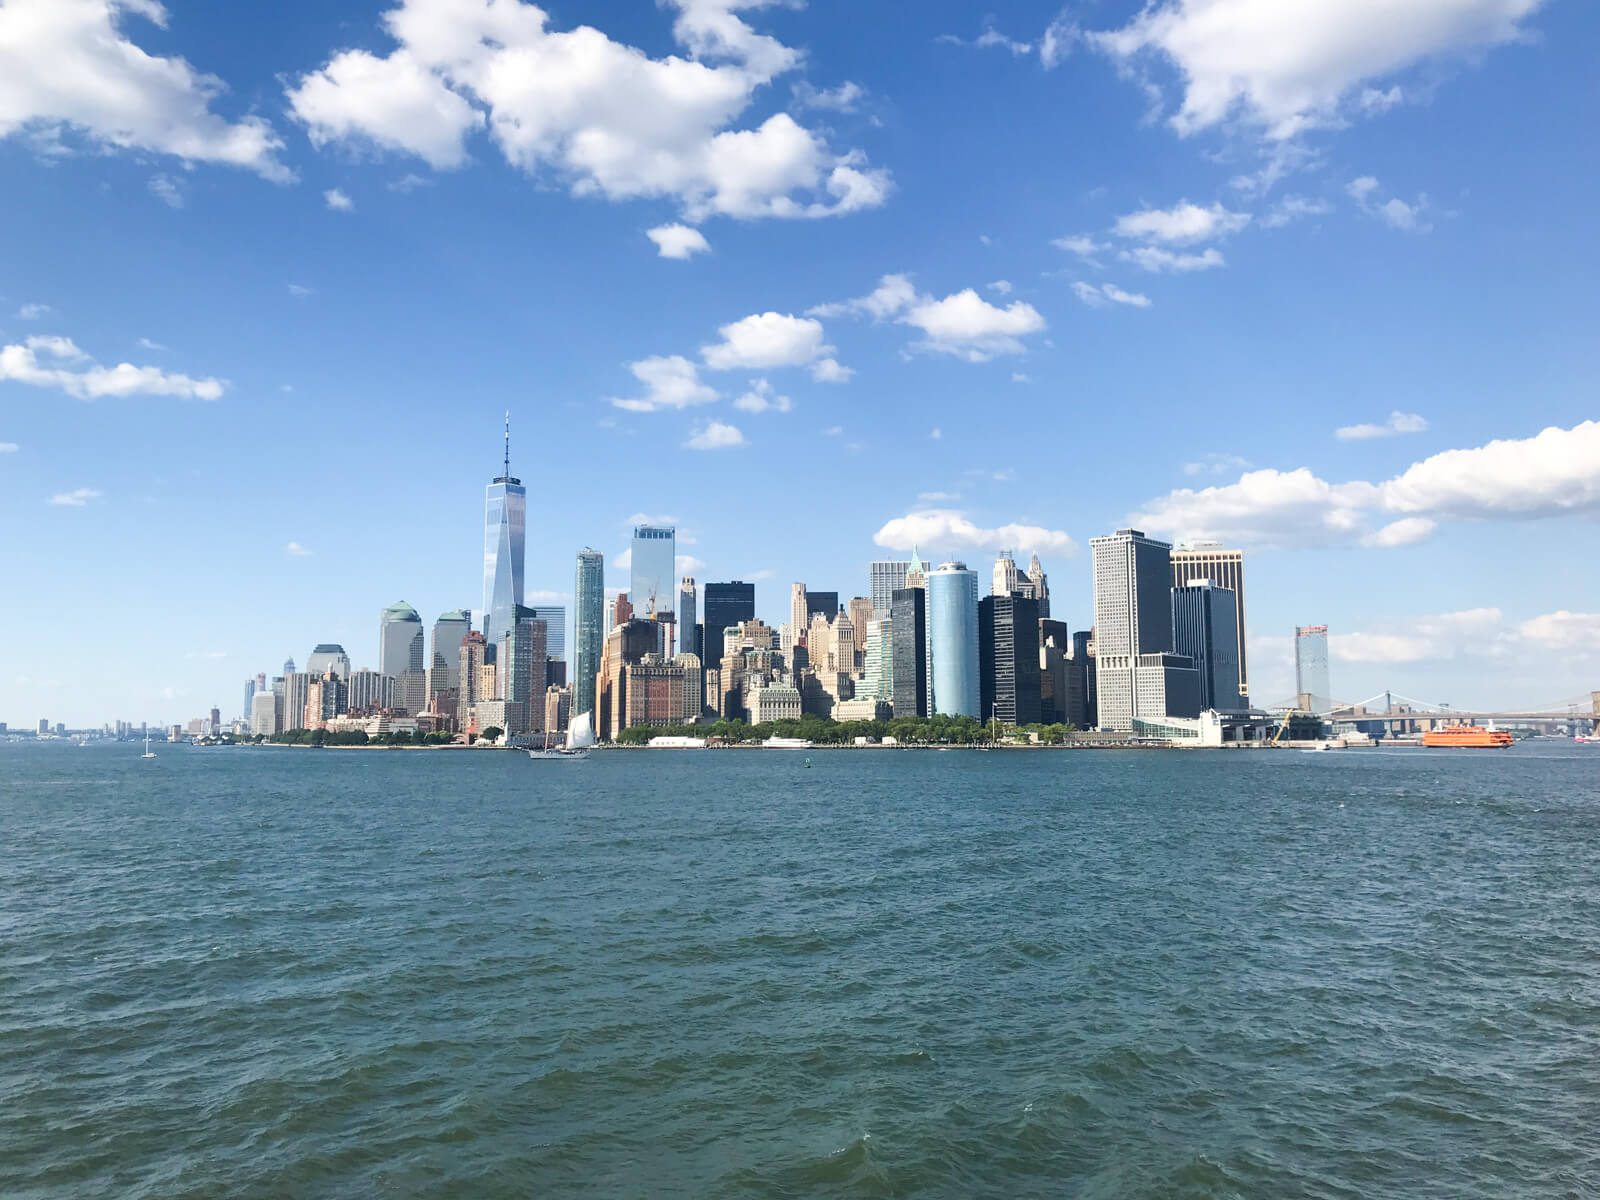 A view of the New York City skyline with the ocean in the foreground. The sky is blue with several clouds